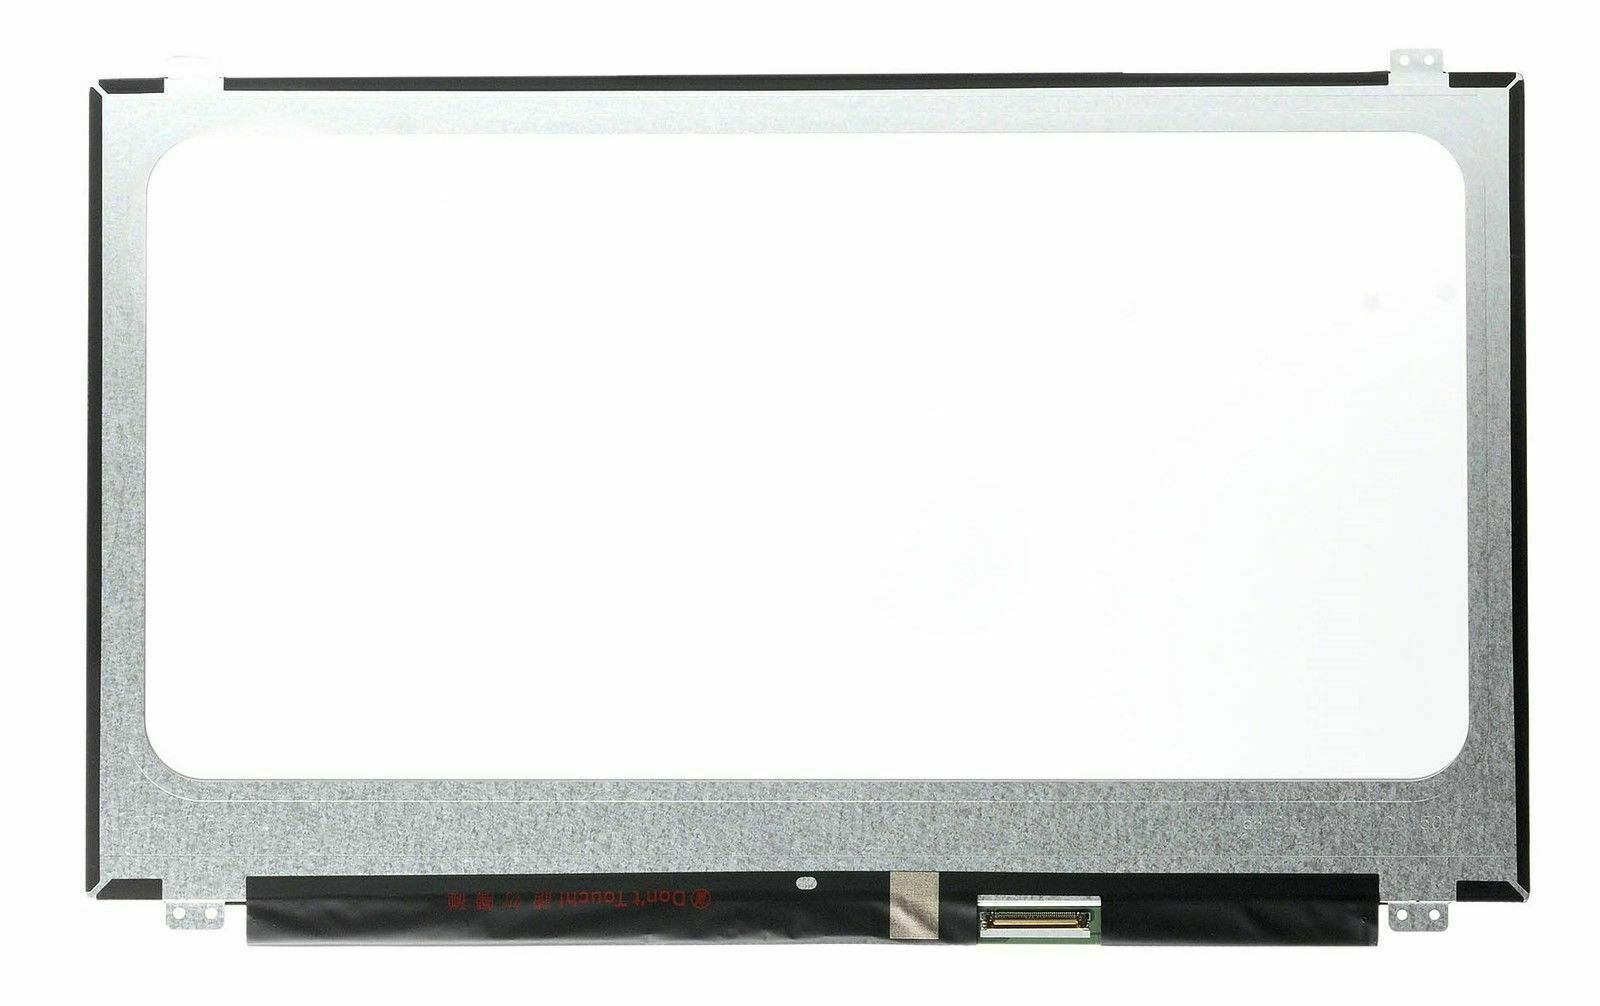 Primary image for B156XTK01.0 For HP 15-AU 15-AU030WM 809612-009 15.6" LCD Touch Screen Assembly